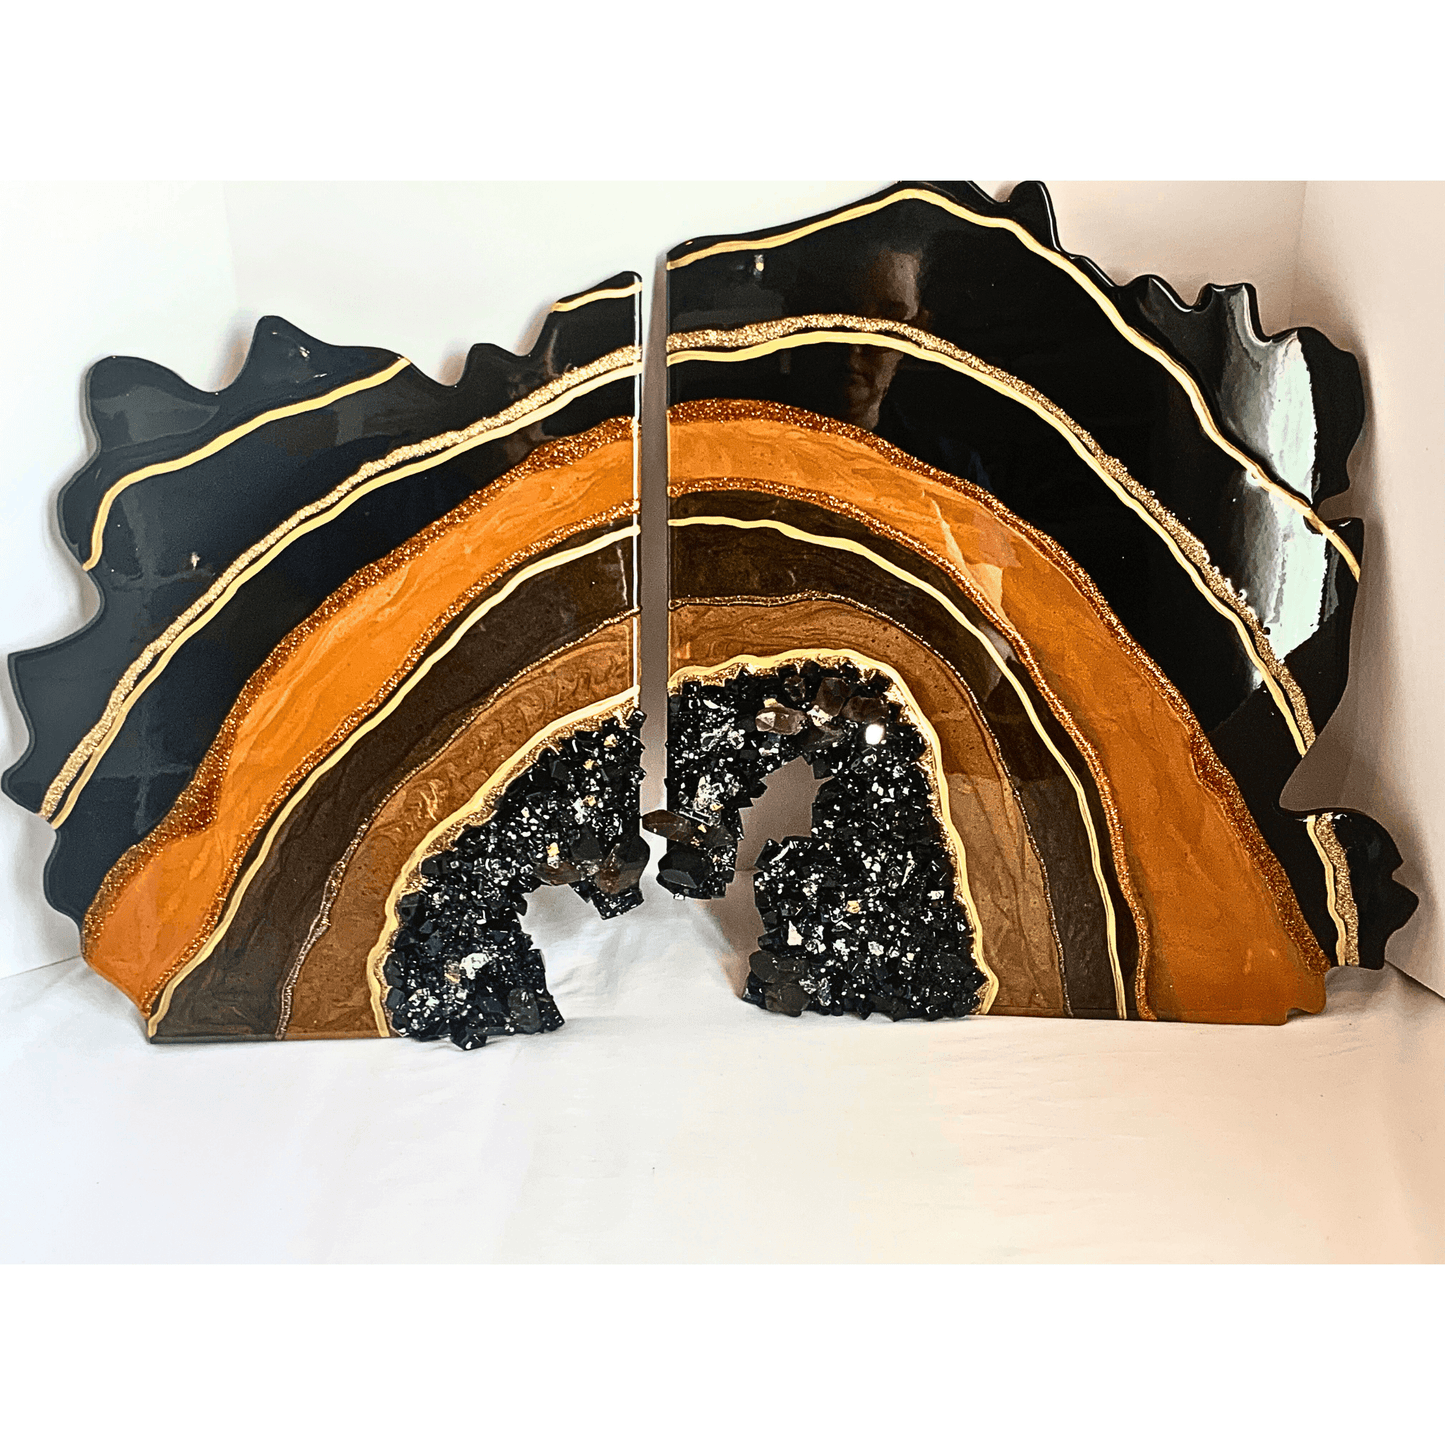 "PROTECTED" Black Obsidian & Smoky Quartz with Bronze and Gold Accents Resin Art Geode